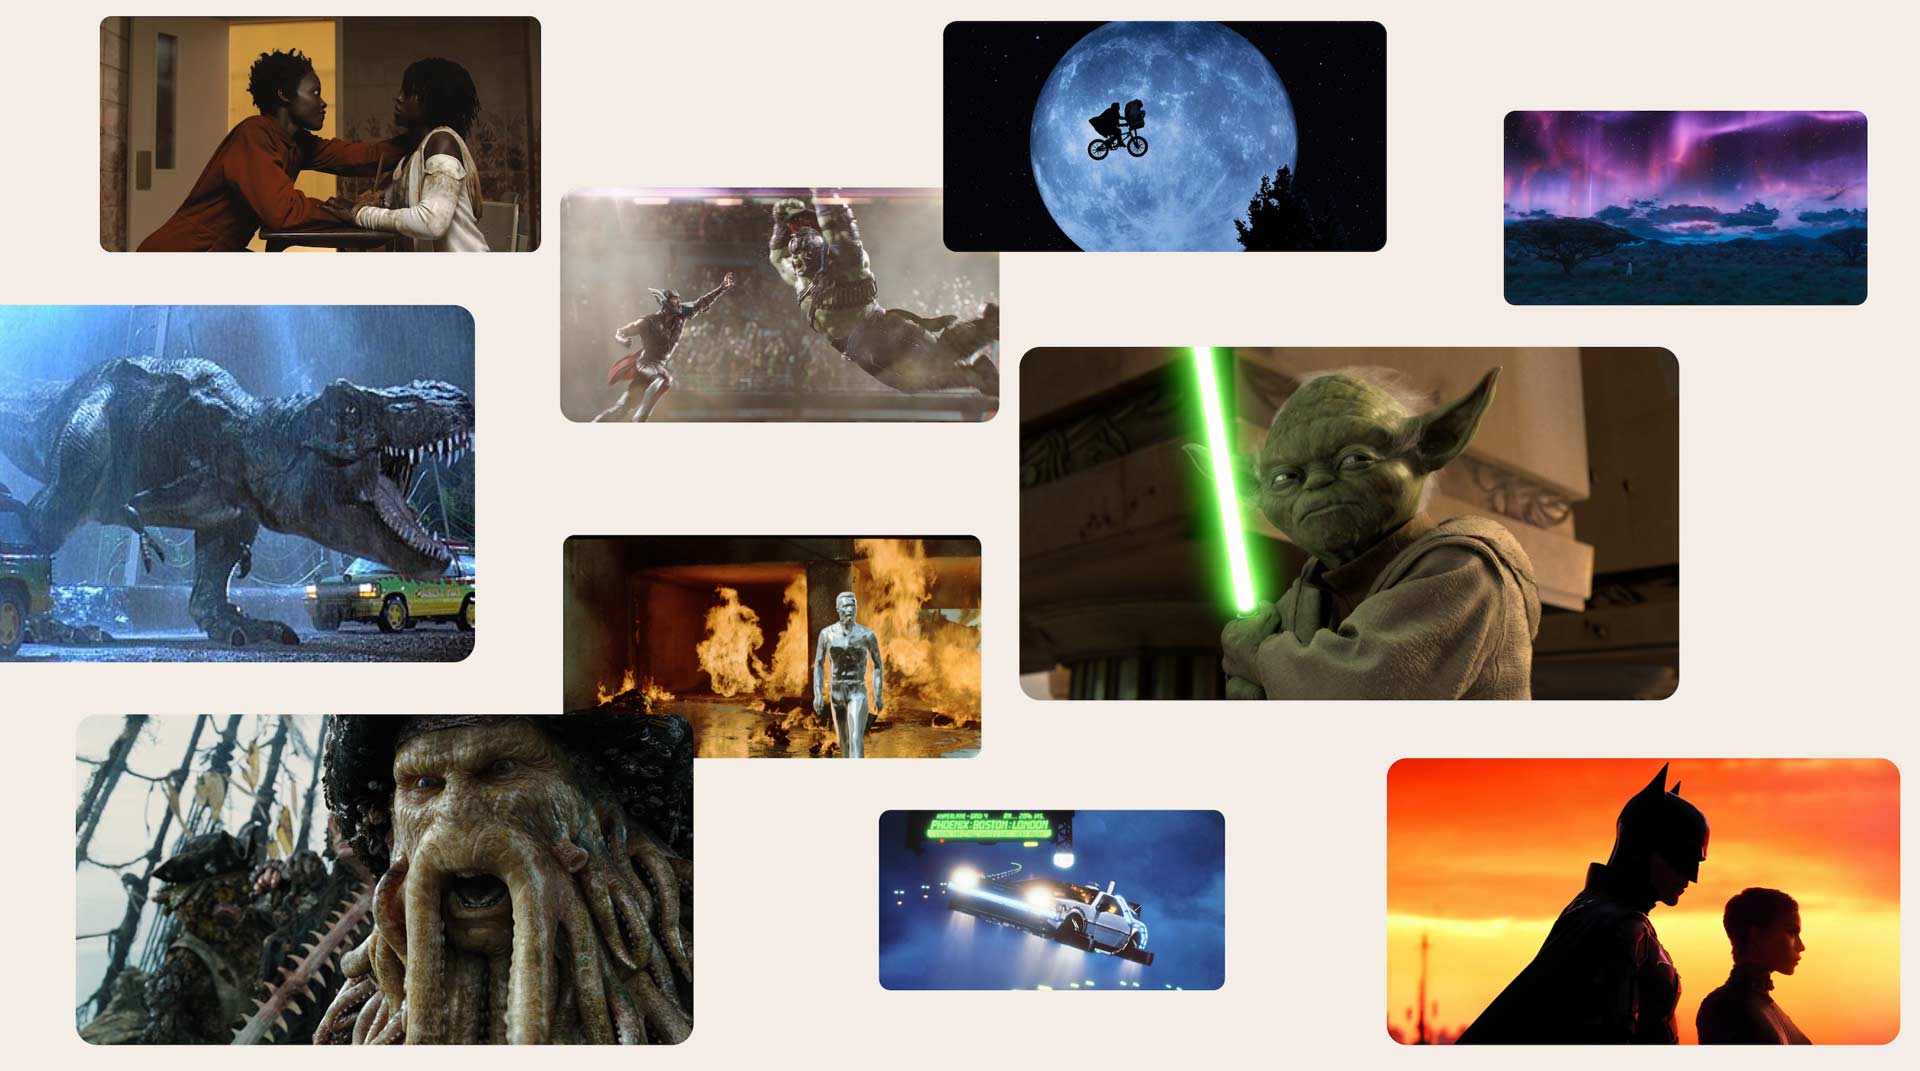 Thumbnails from projects ILM worked on like The Batman, E.T., Star Wars, Pirates of the Caribbean, Black Panther